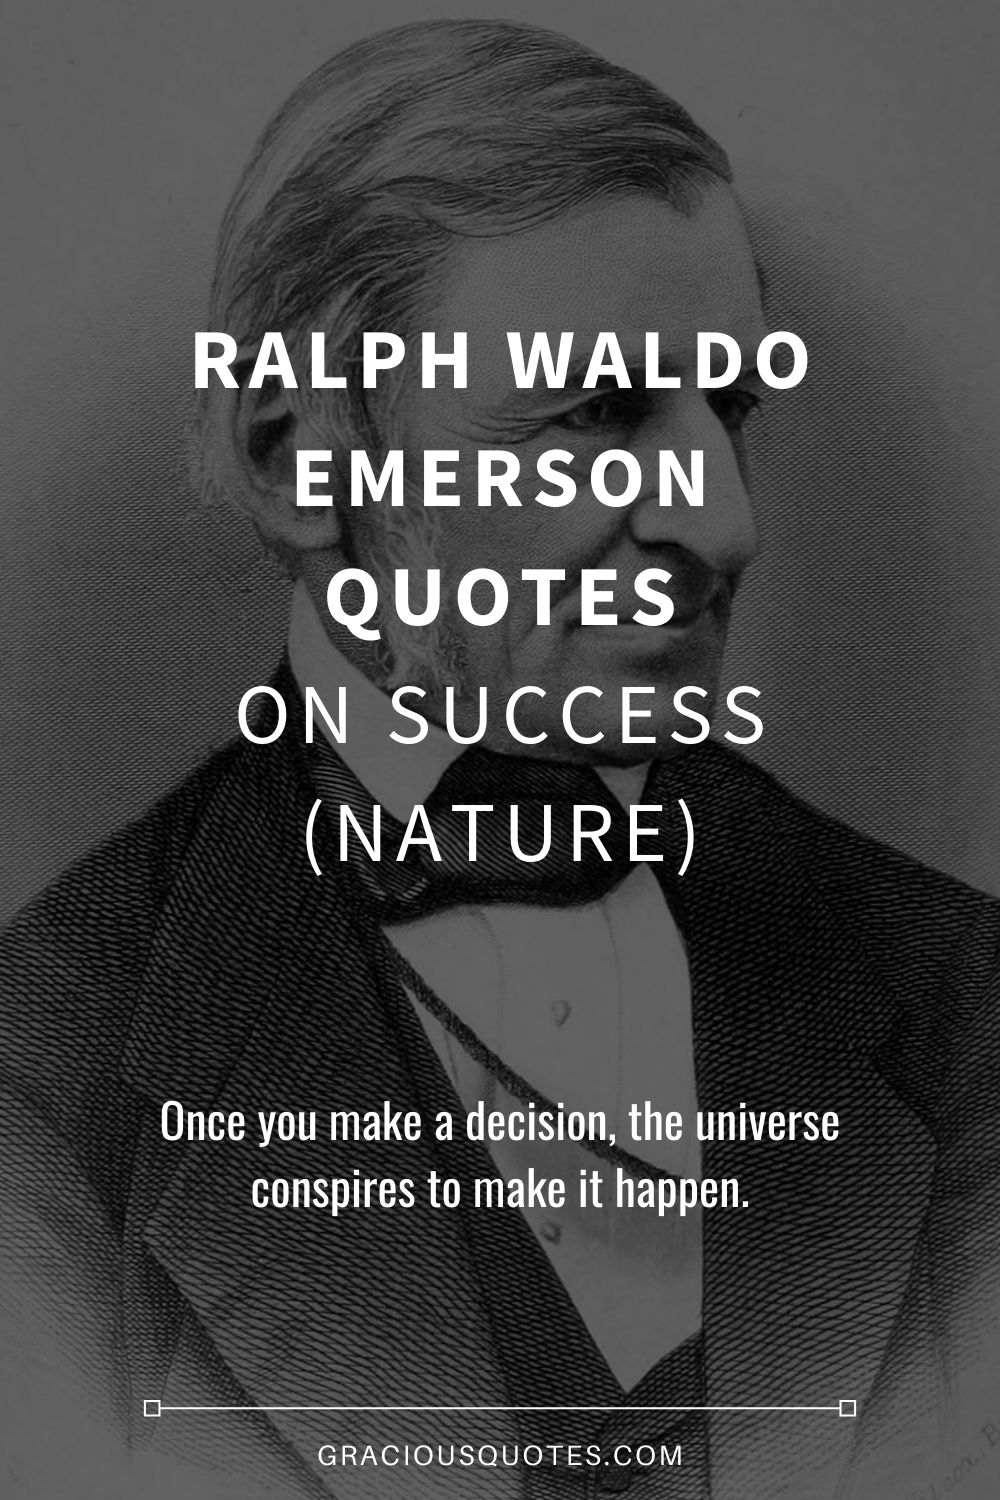 Ralph Waldo Emerson Quotes on Success (NATURE) - Gracious Quotes